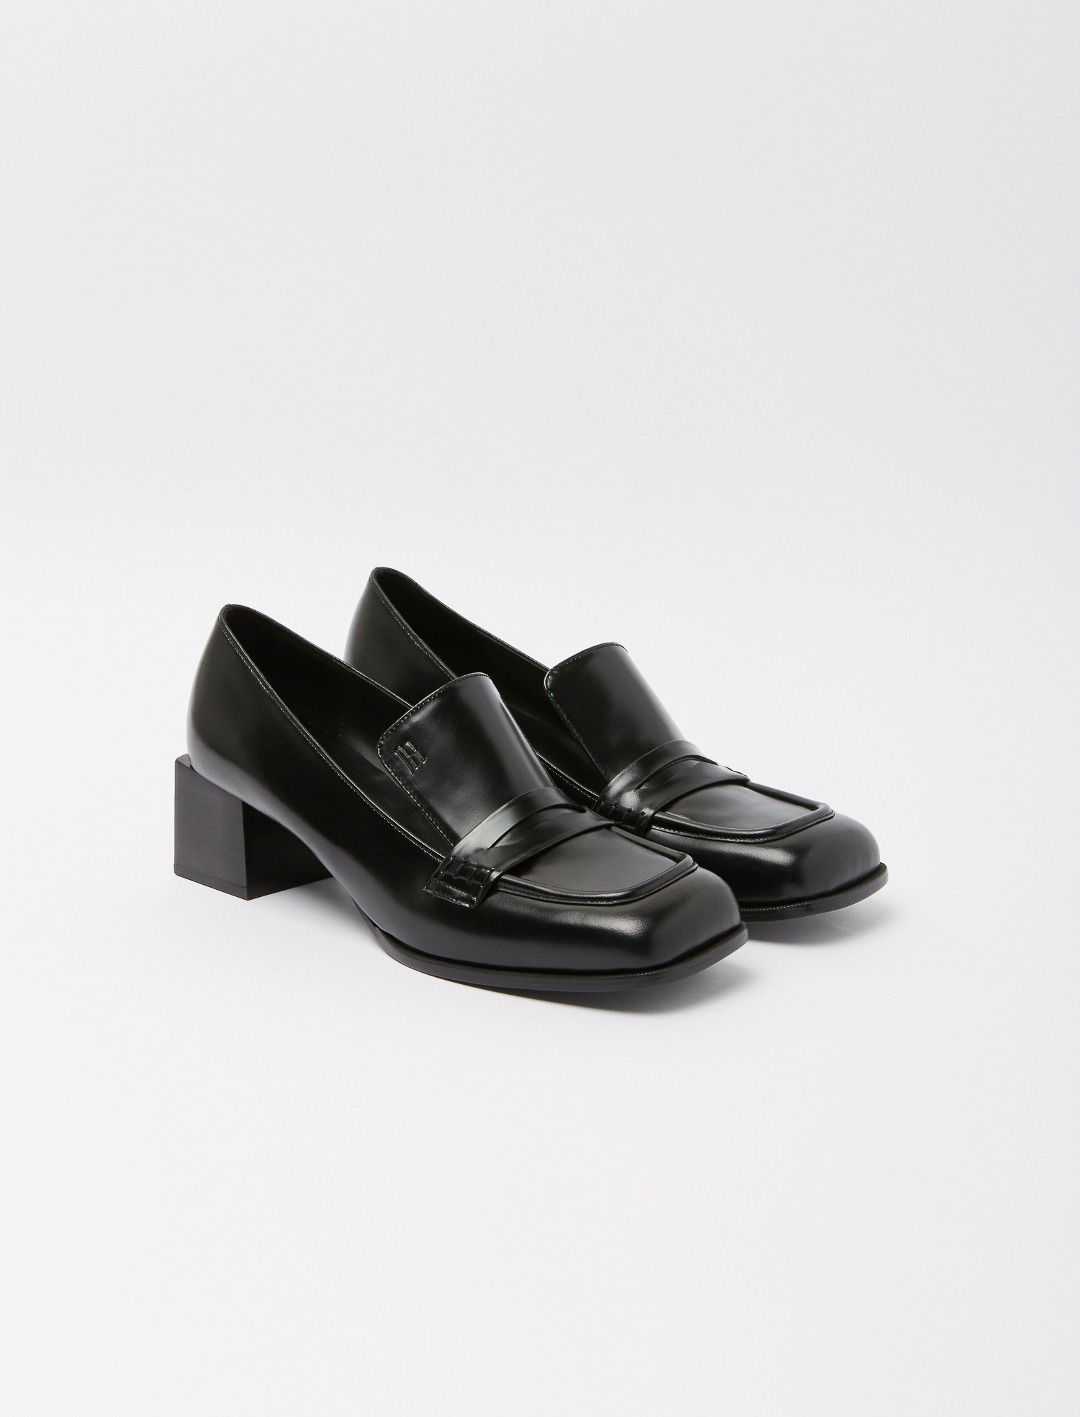 023 Mellany loafer pumps